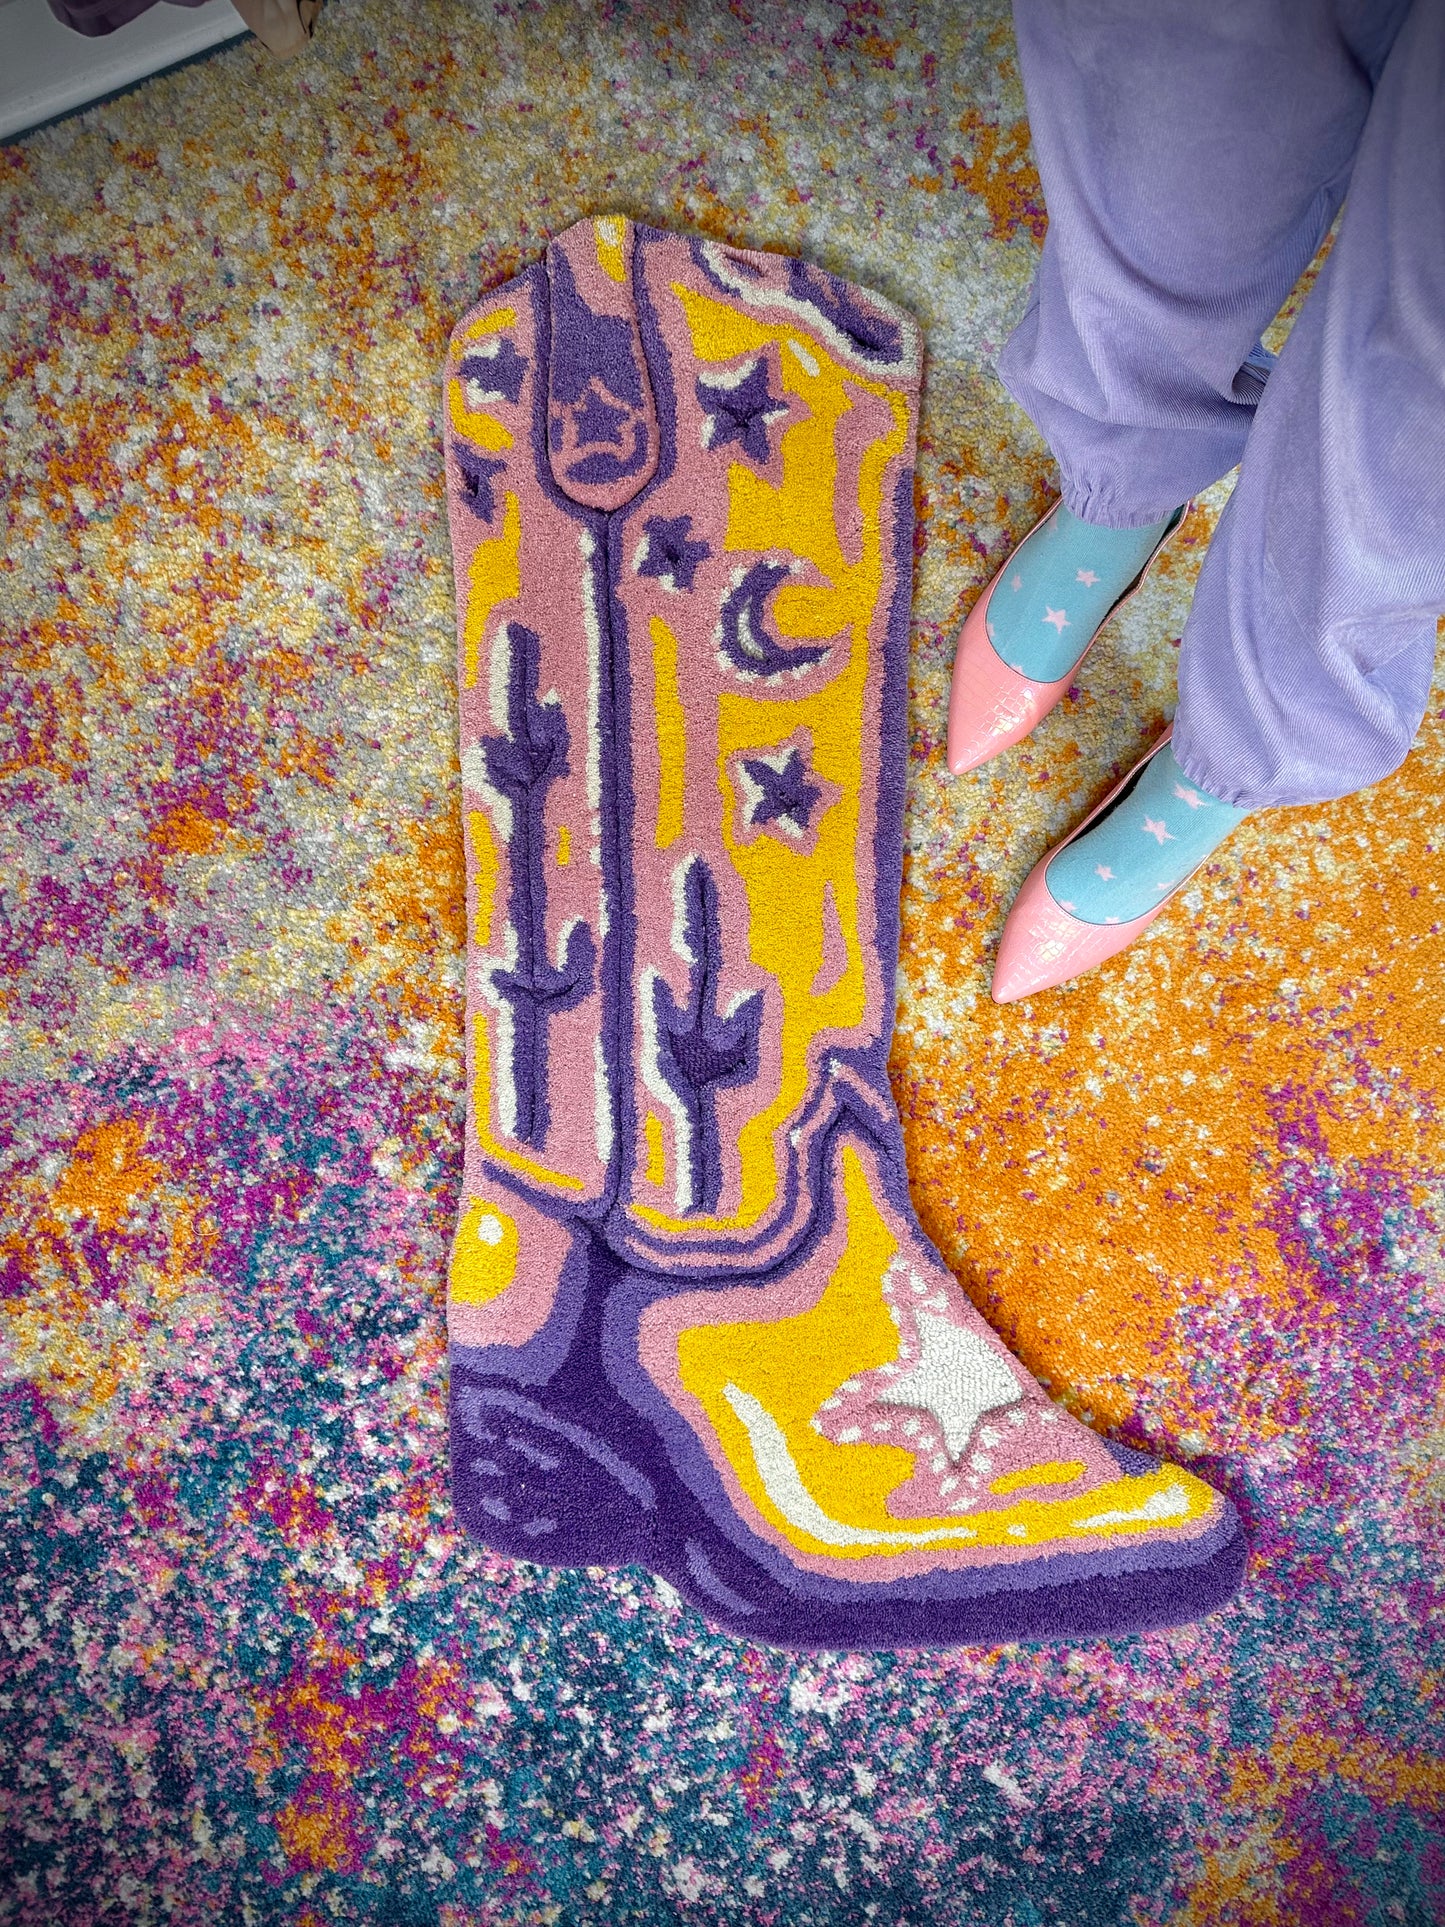 Space Cowboy Boot Rug by Chrissy Crater Moon Soft Goods